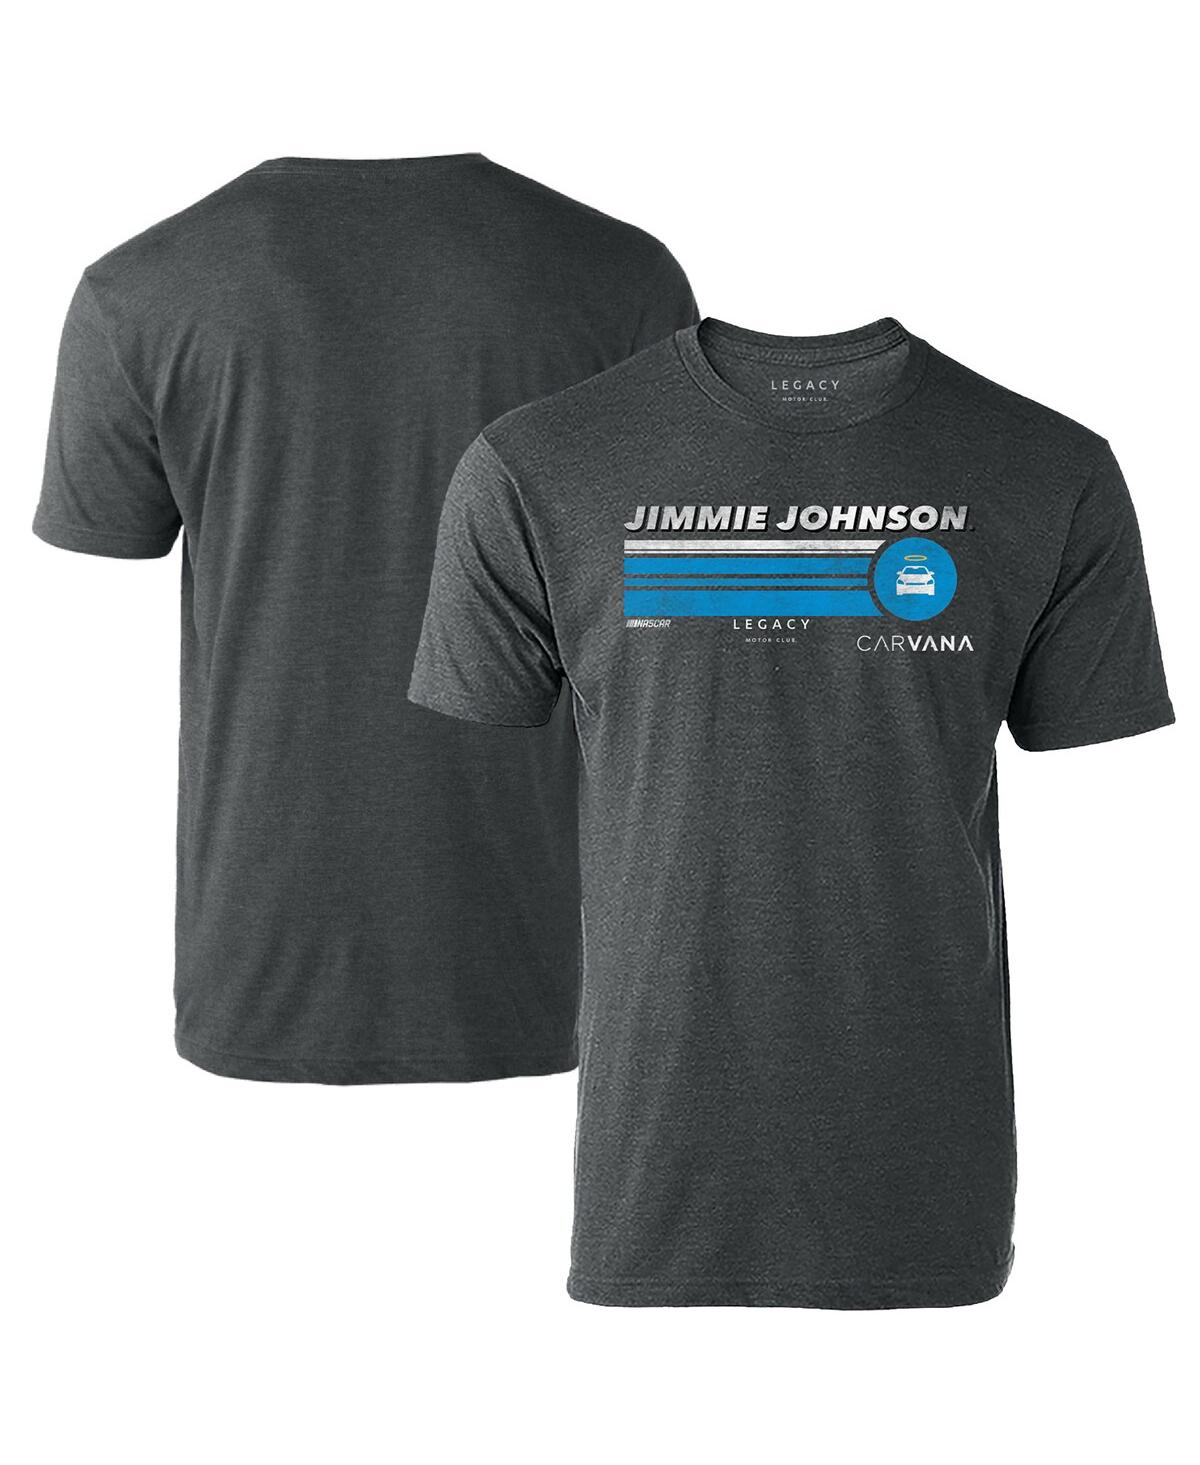 Men's Legacy Motor Club Team Collection Heather Charcoal Jimmie Johnson Hot Lap T-shirt - Heather Charcoal